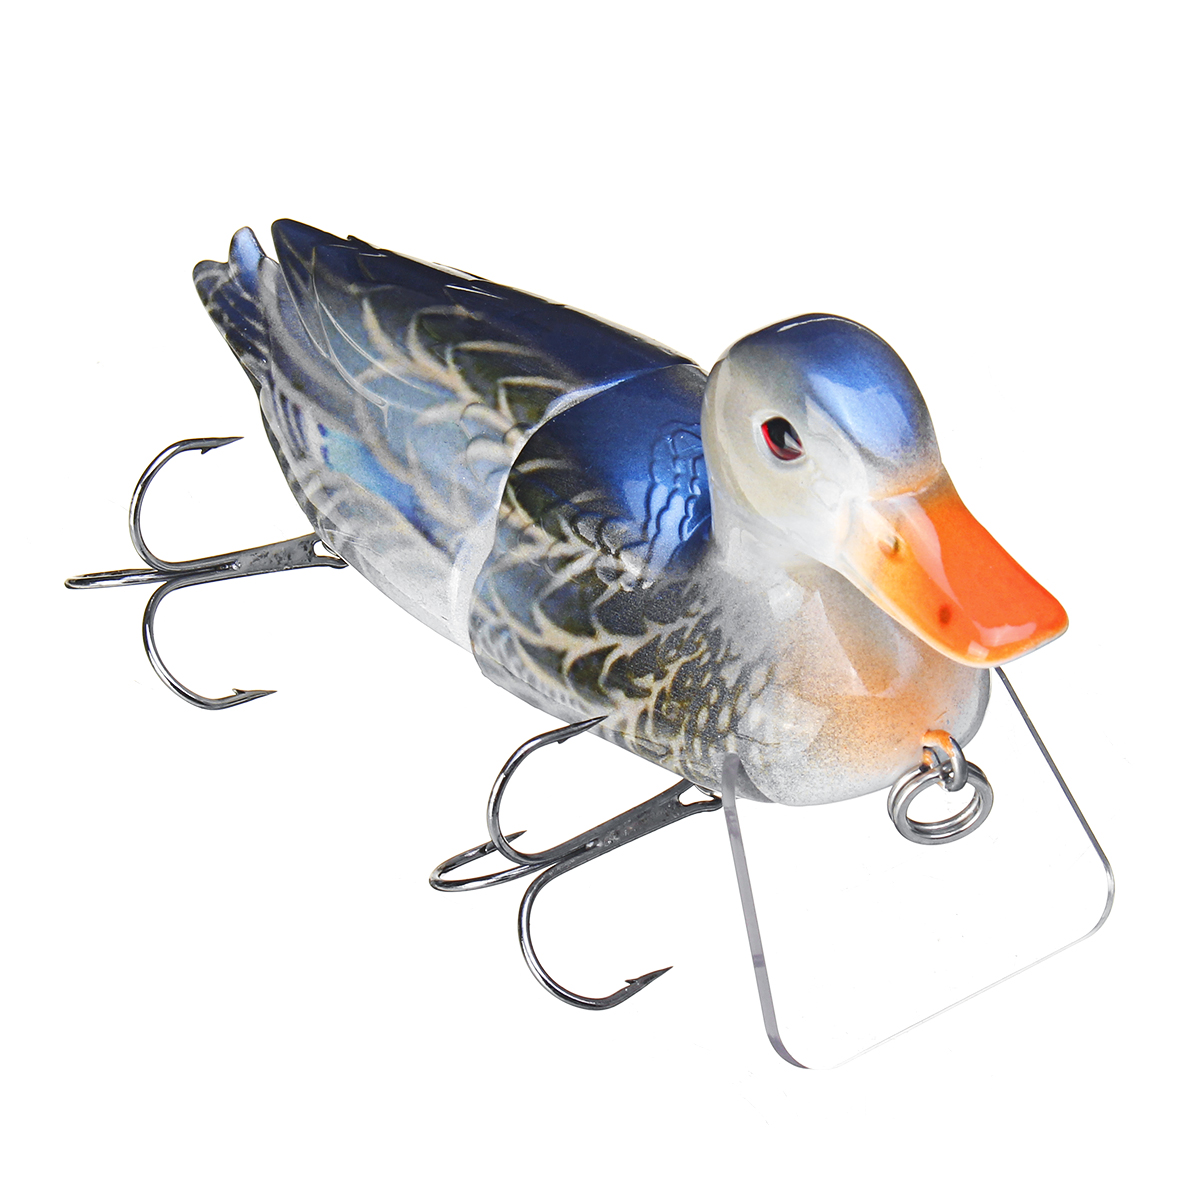 ZANLURE-1PC-15CM-90g-Floating-Duck-Shape-Fishing-Lure-With-Hook-Topwater-Soft-Bait-Fishing-Tackle-1648972-5